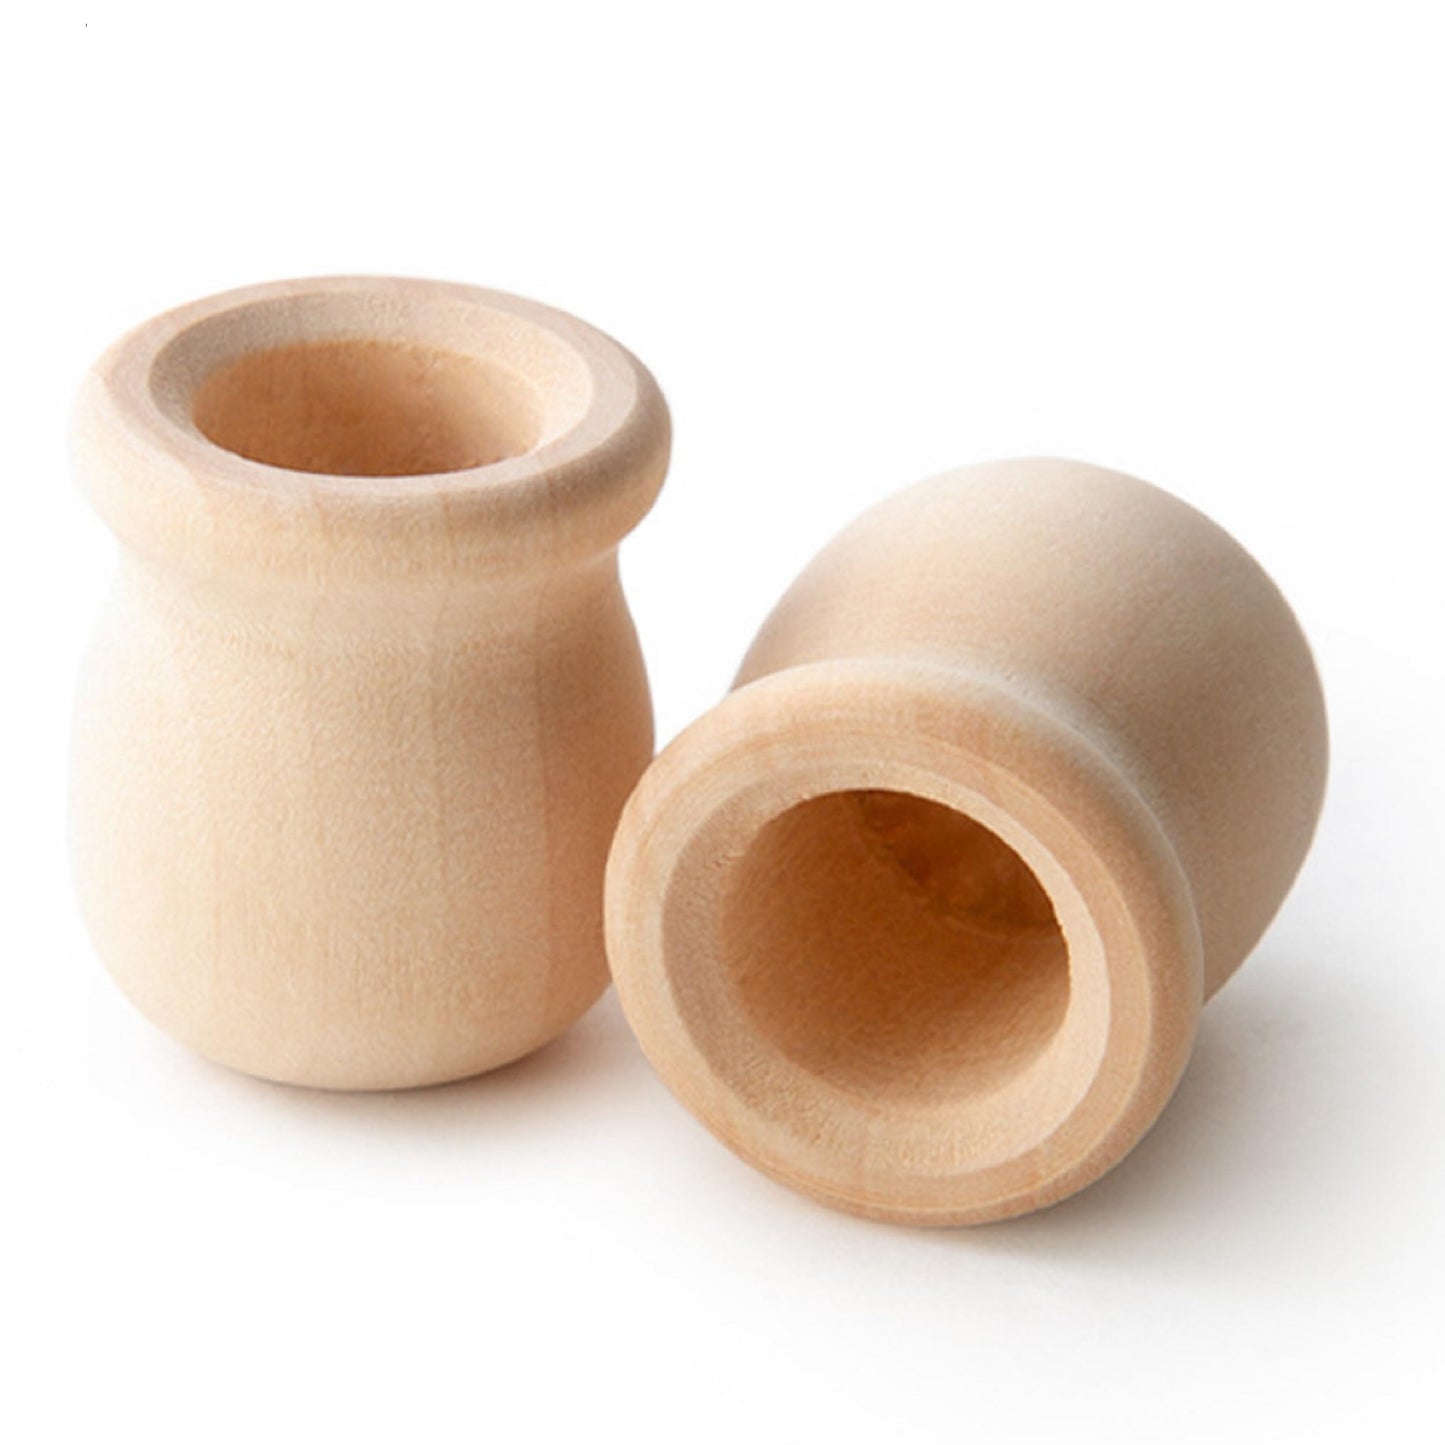 Pinehurst Crafts Unfinished Wooden Bean Pot Candle Cup, Great for Mini Candlestick, Honey Pot or Flower Pot, 1-1/4 Inch Tall (5/8" Hole), Pack of 6